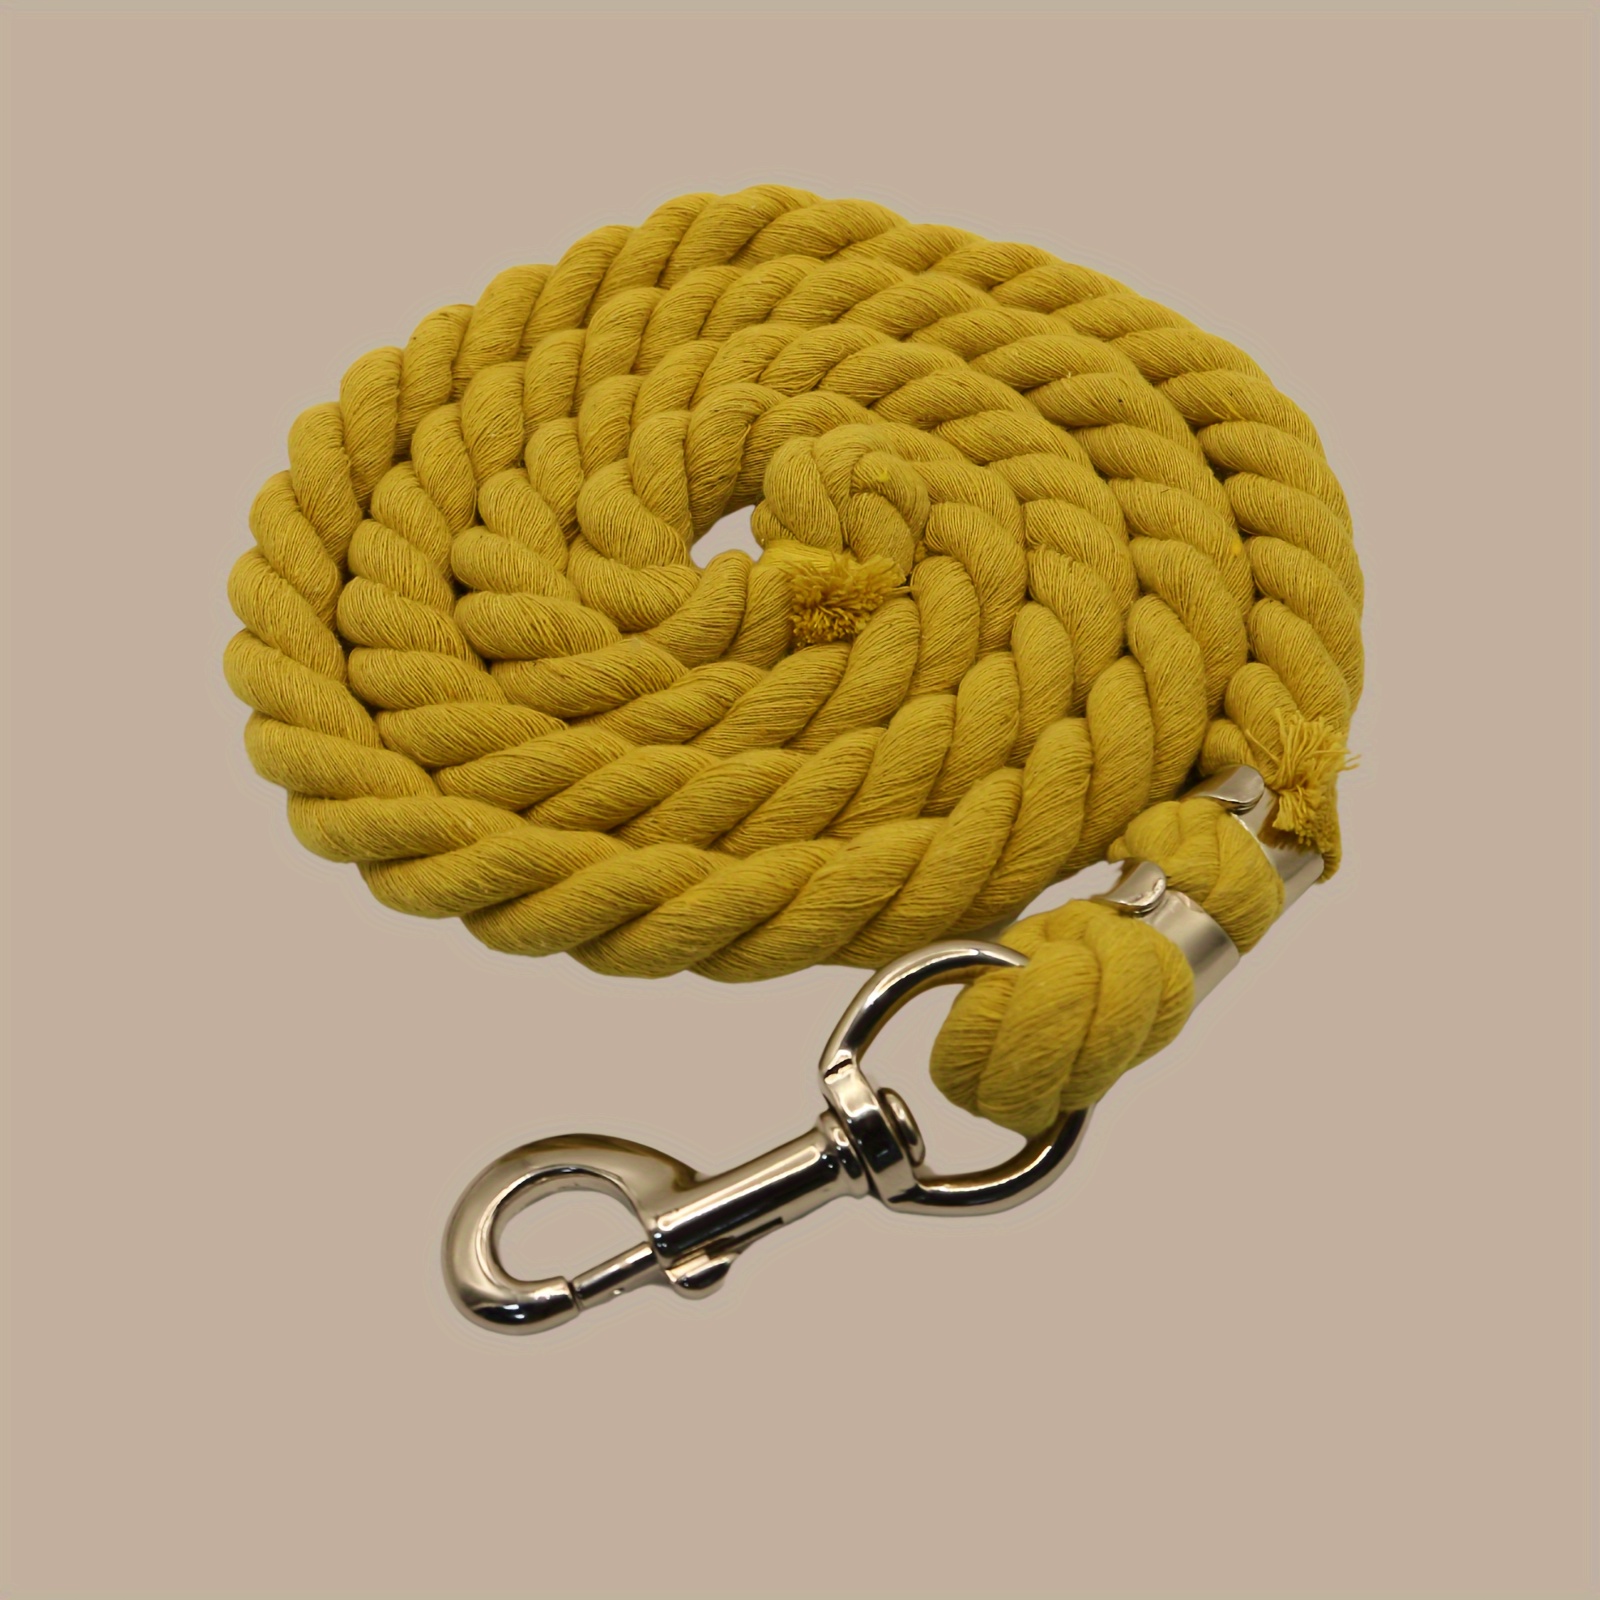 Durable Cotton Horse & Large Dog Leash - Comfort Grip, Easy Control for Horses and Big Breeds